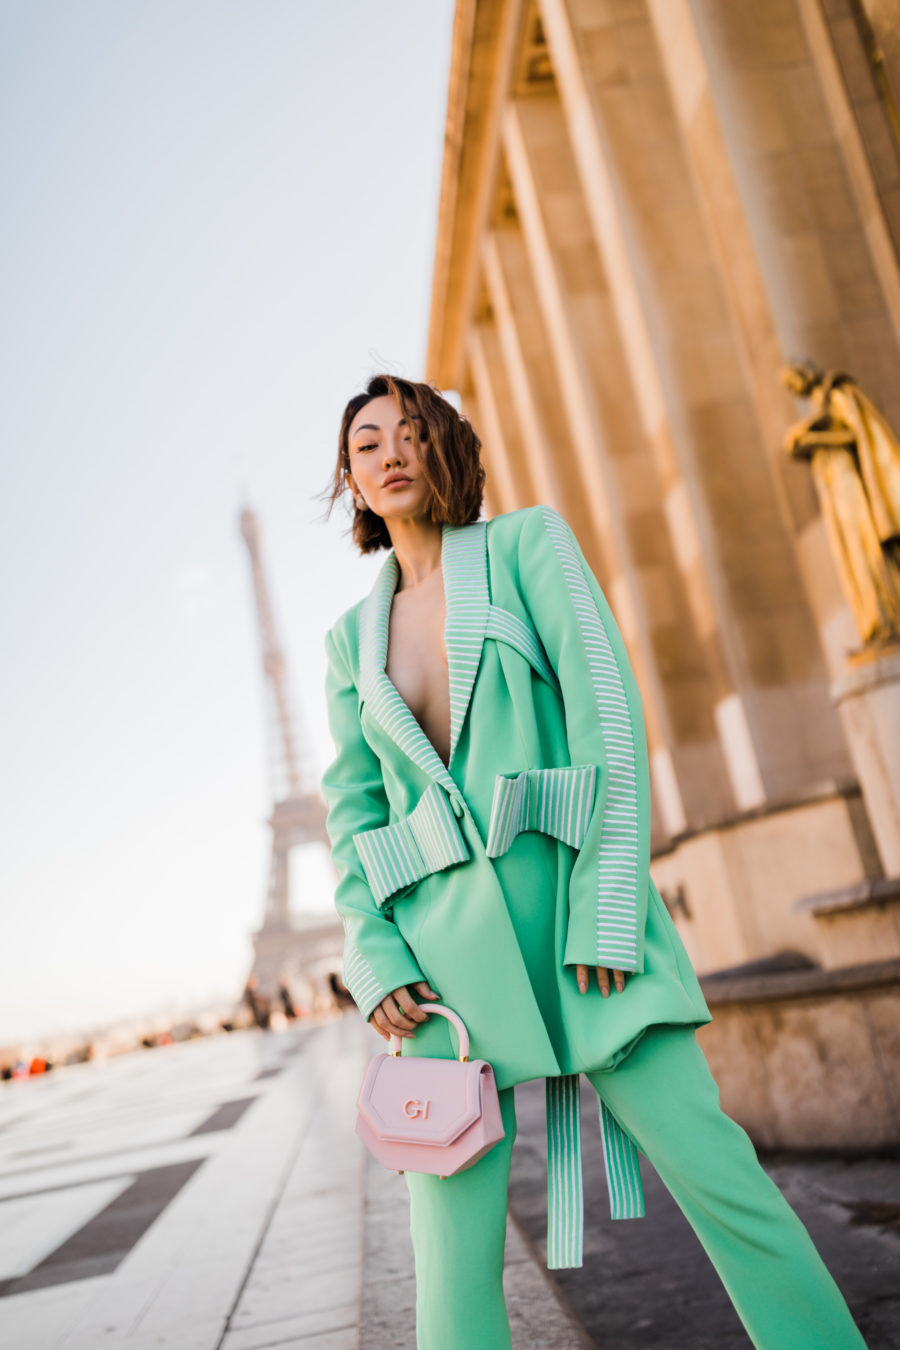 jessica wang wearing a green pastel blazer with bows and matching pants while sharing casual spring suits for women // Jessica Wang - Notjessfashion.com